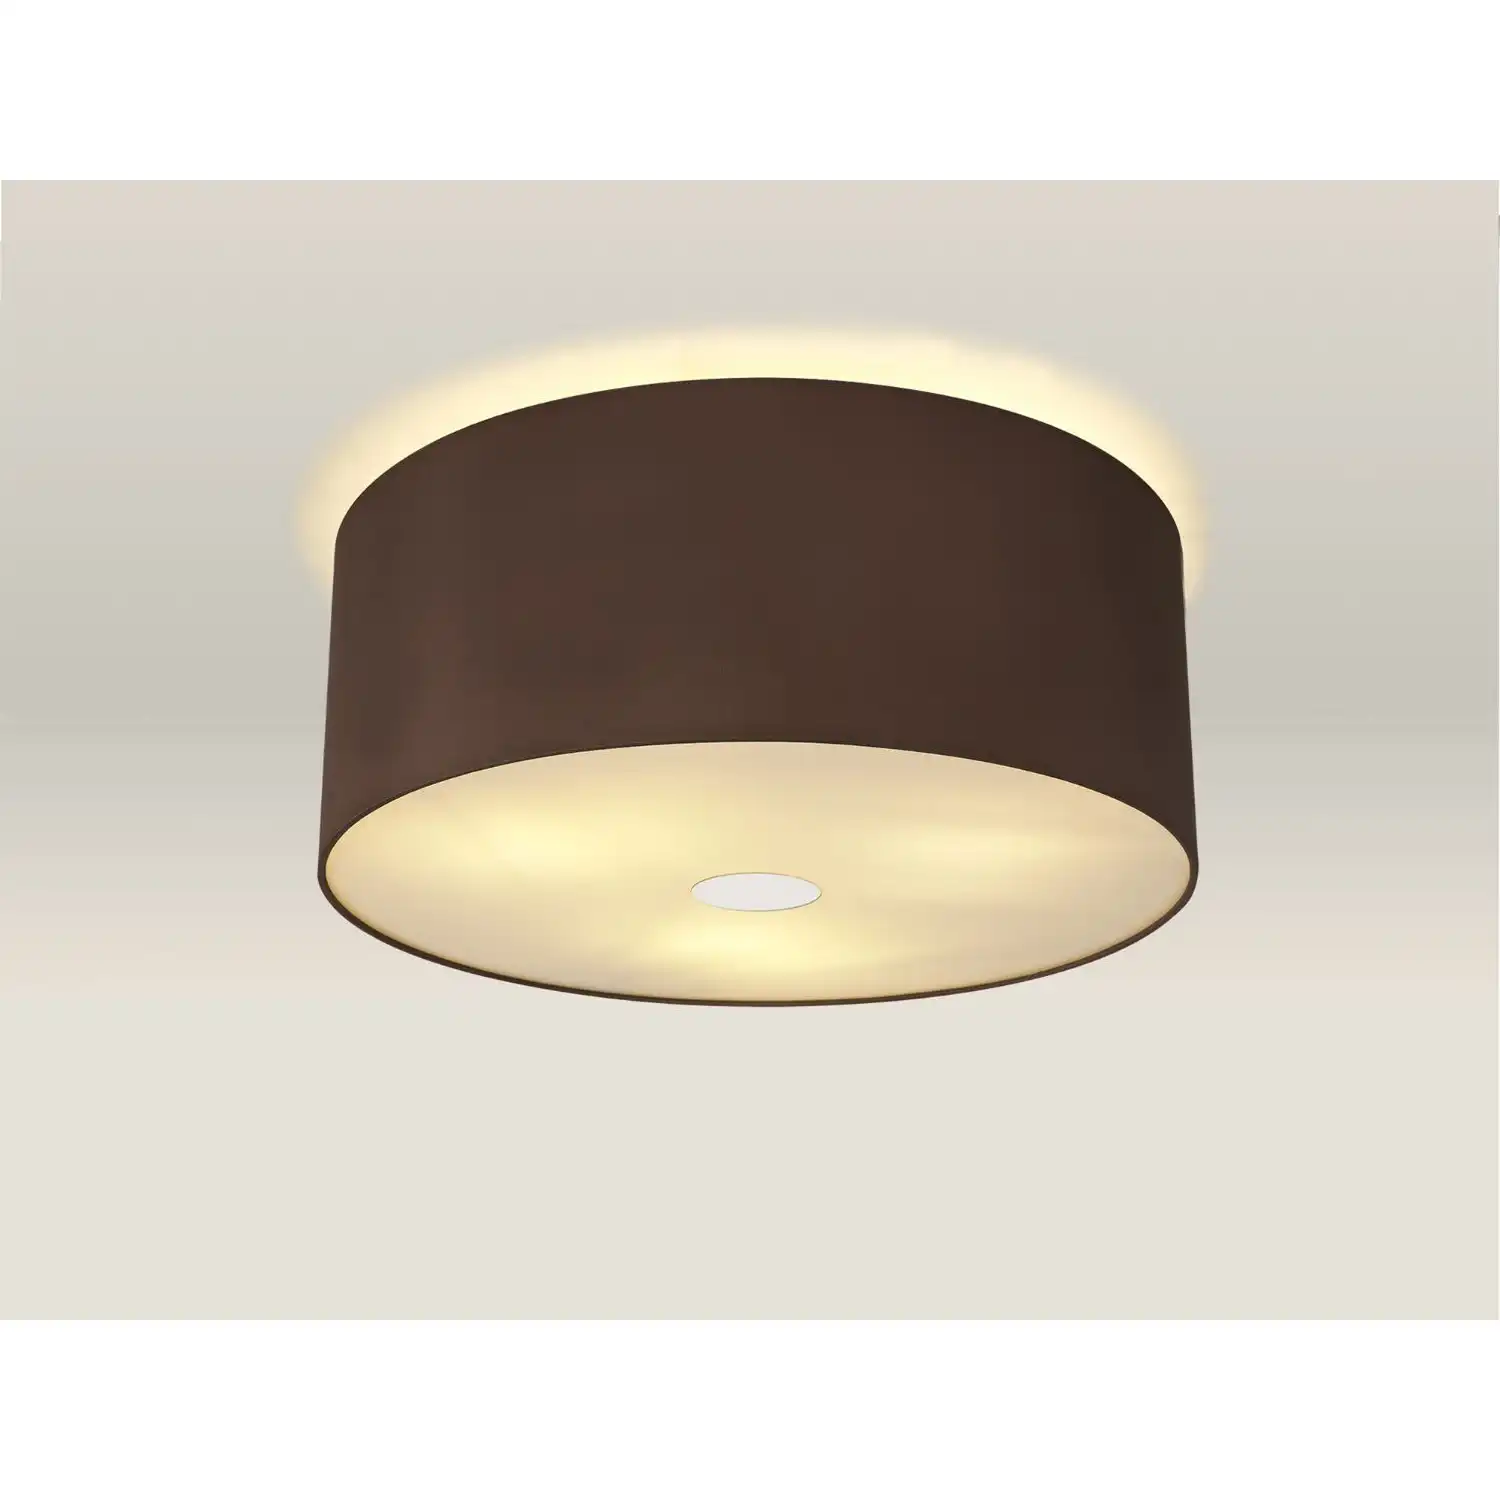 Baymont Polished Chrome 3 Light E27 Drop Flush Ceiling c w 500 Dual Faux Silk Fabric Shade Cocoa Grecian Bronze And 500mm Frosted PC Acrylic Diffuser